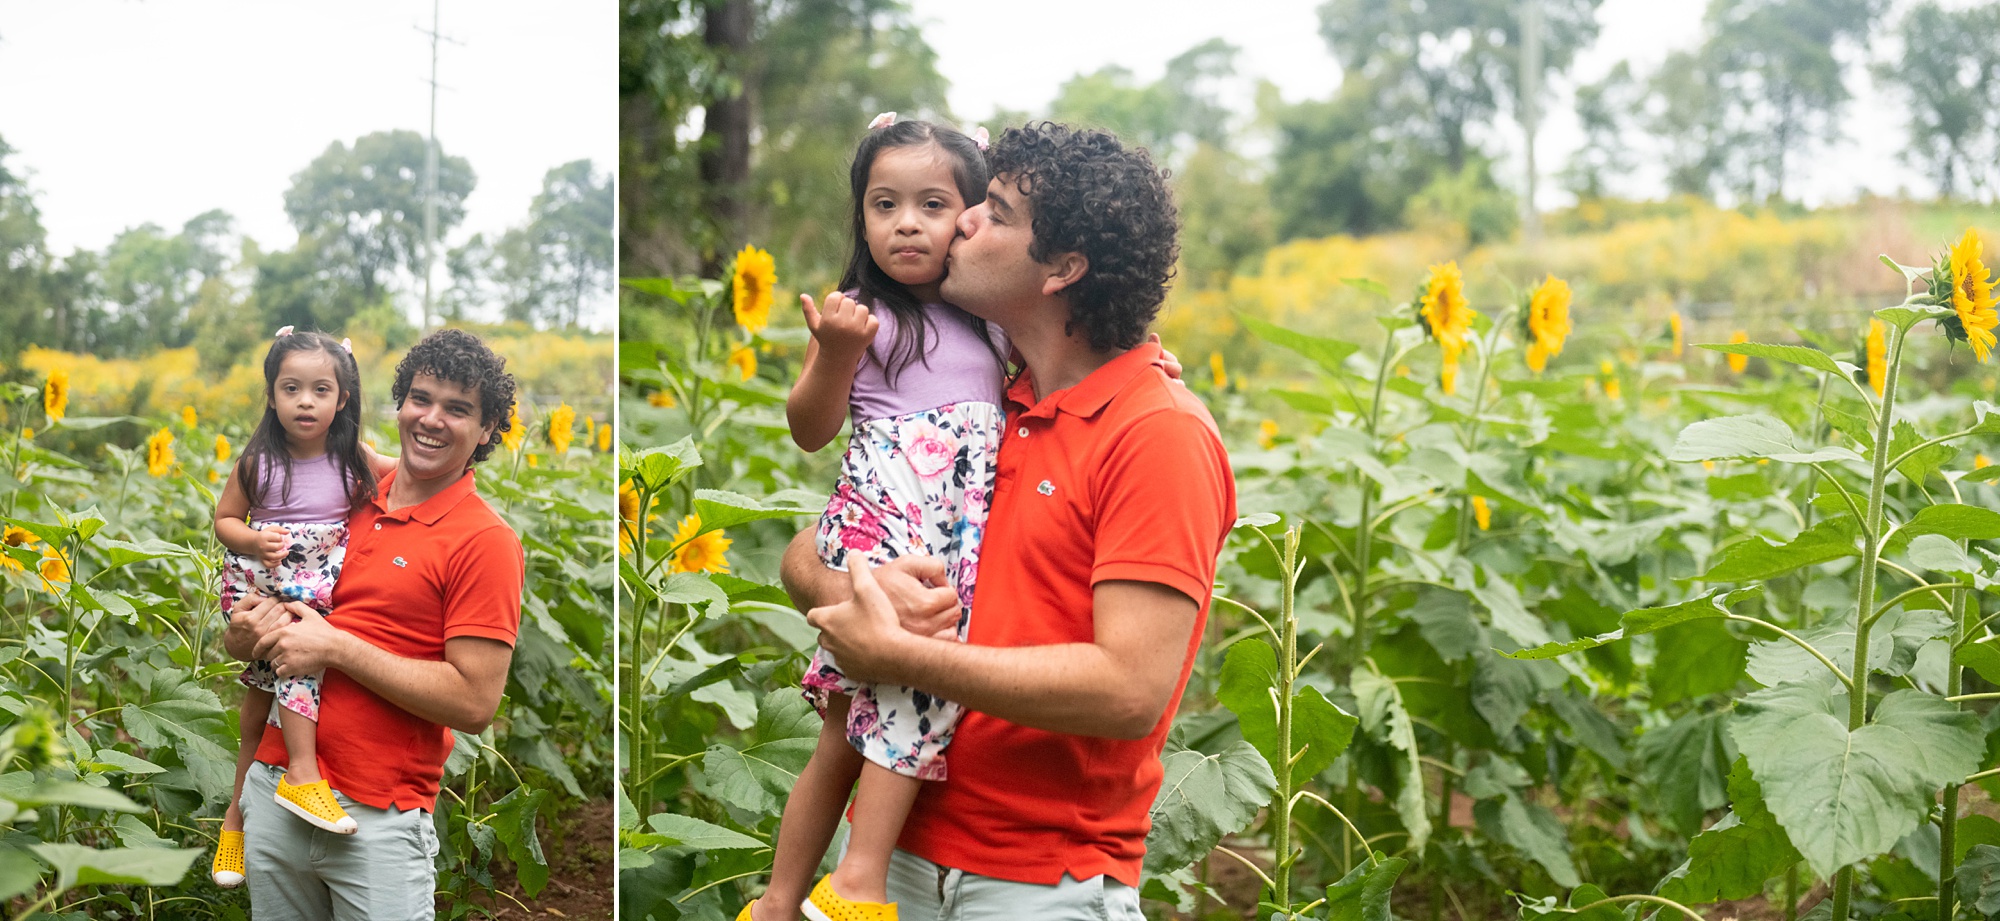 dad and daughter pose with sunflowers